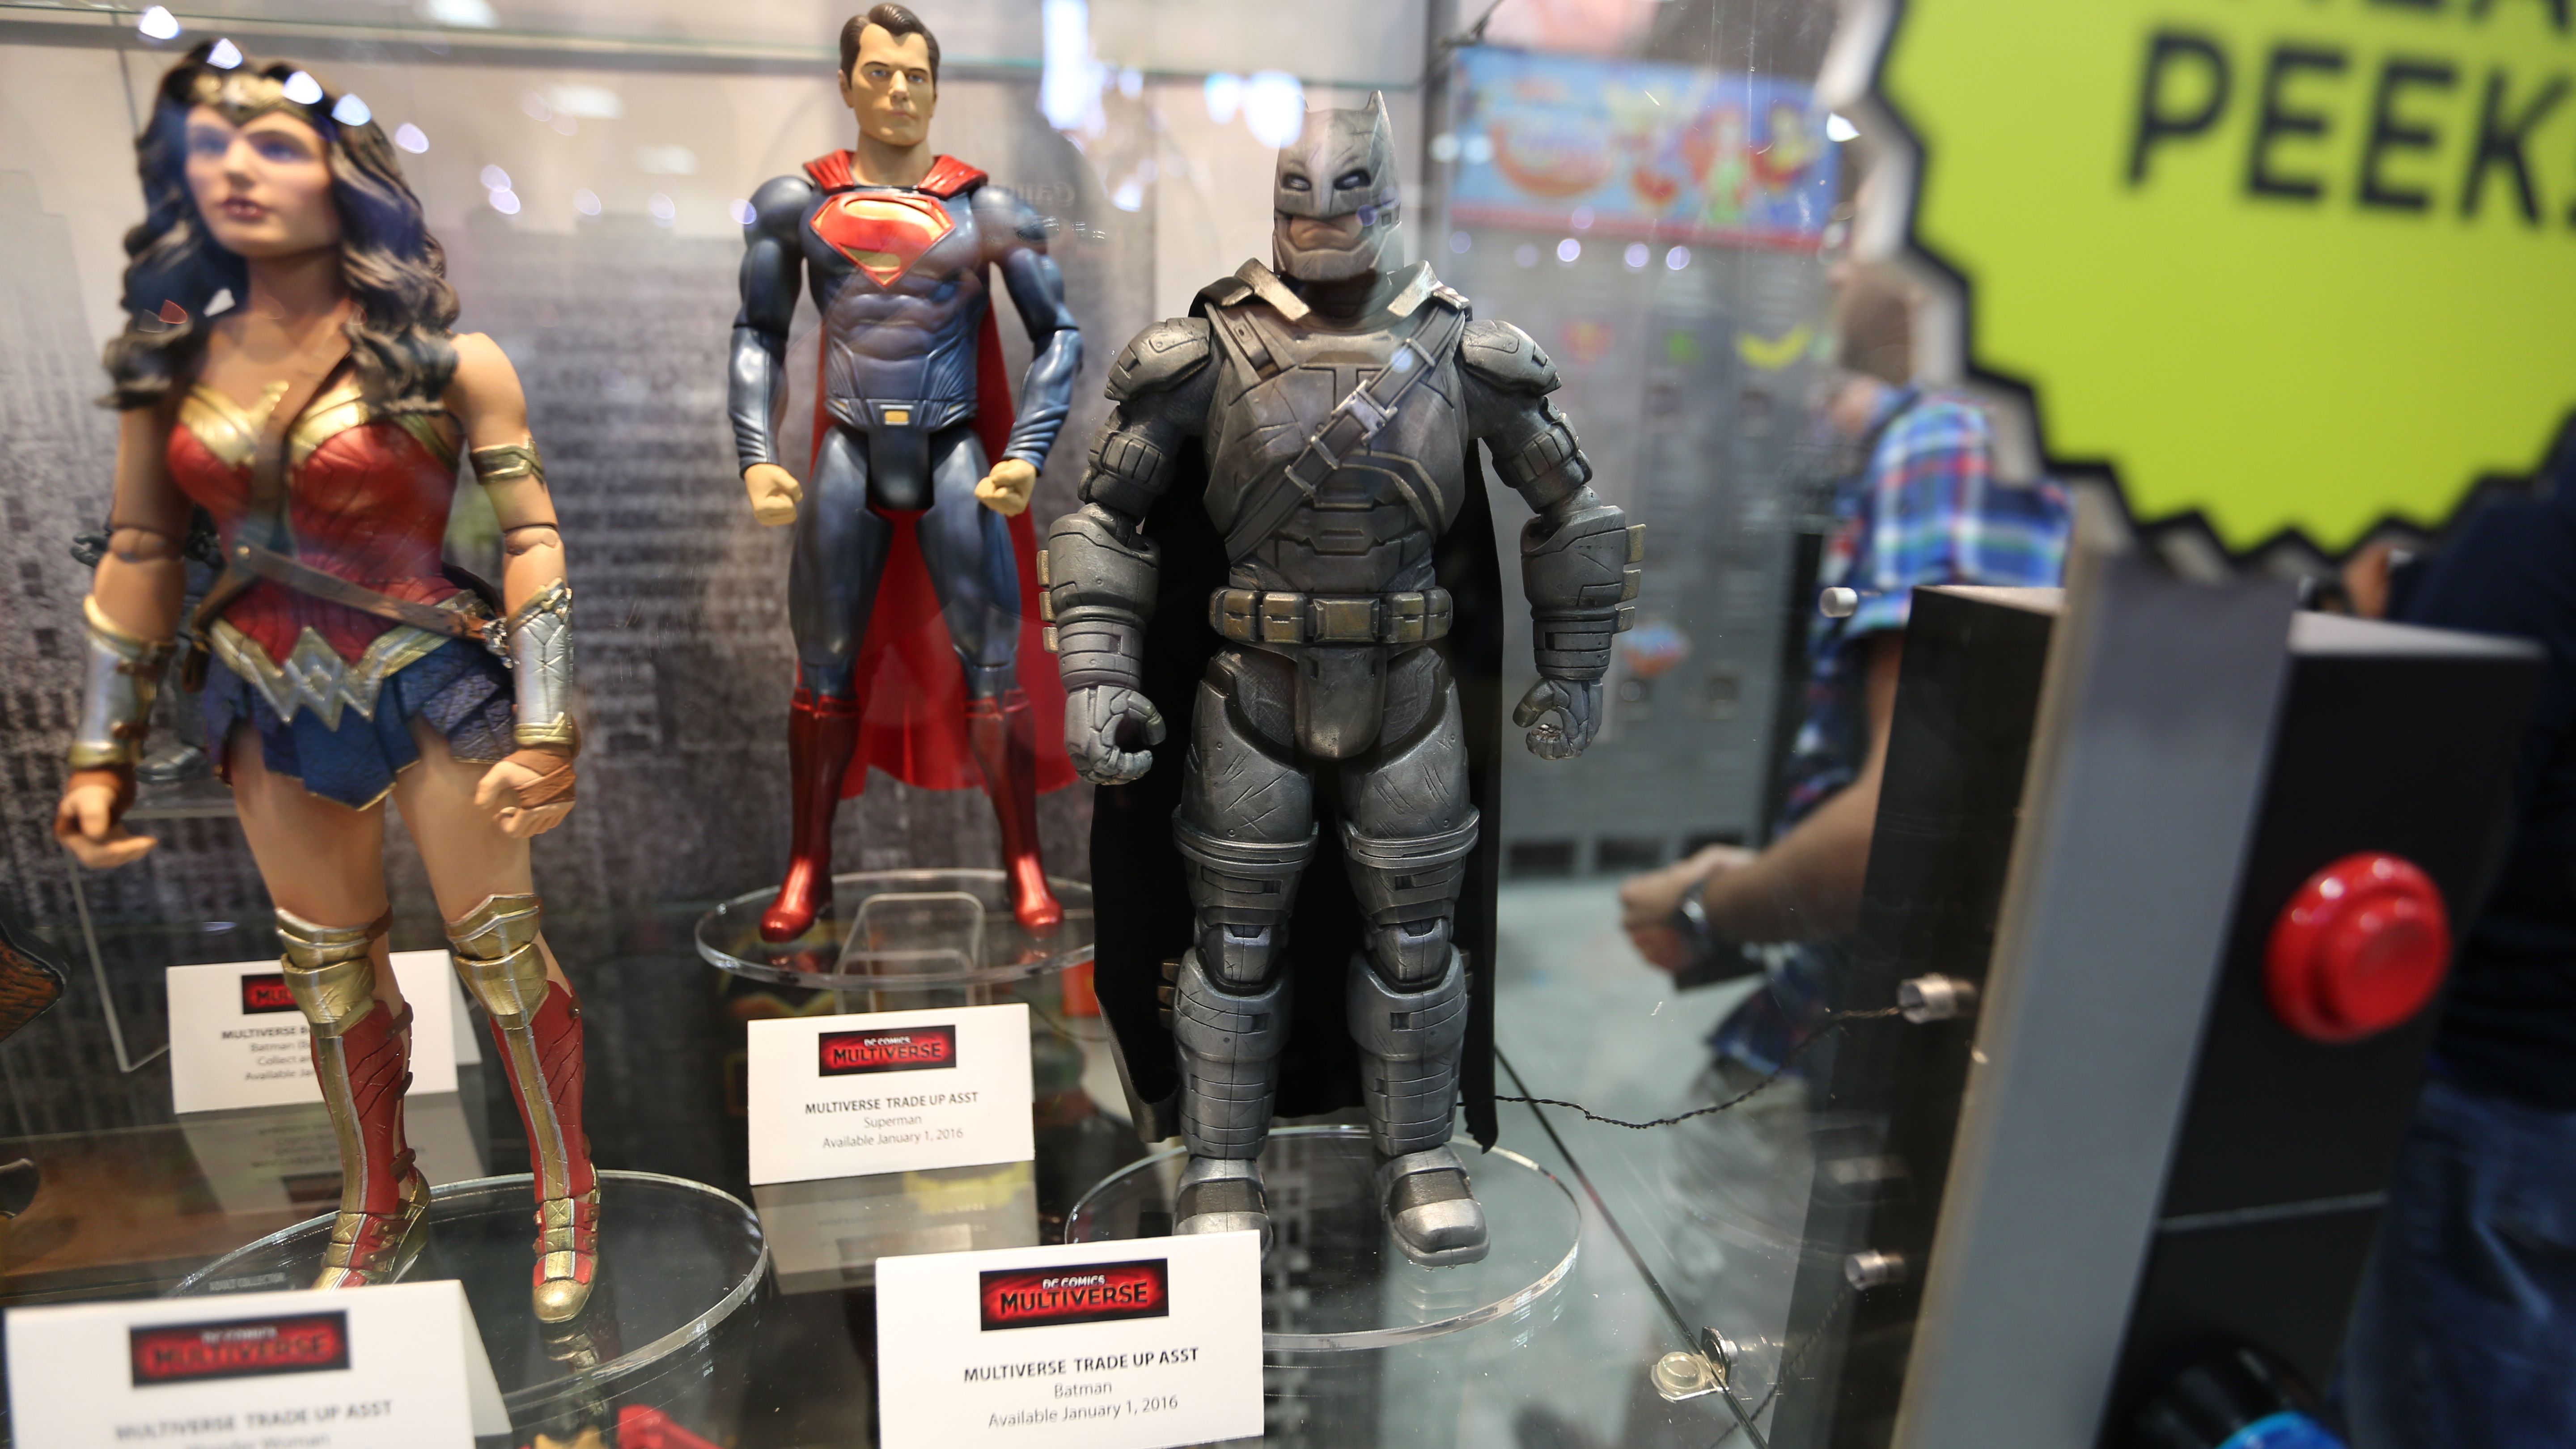 Batman vs Superman Toy Images from Comic-Con